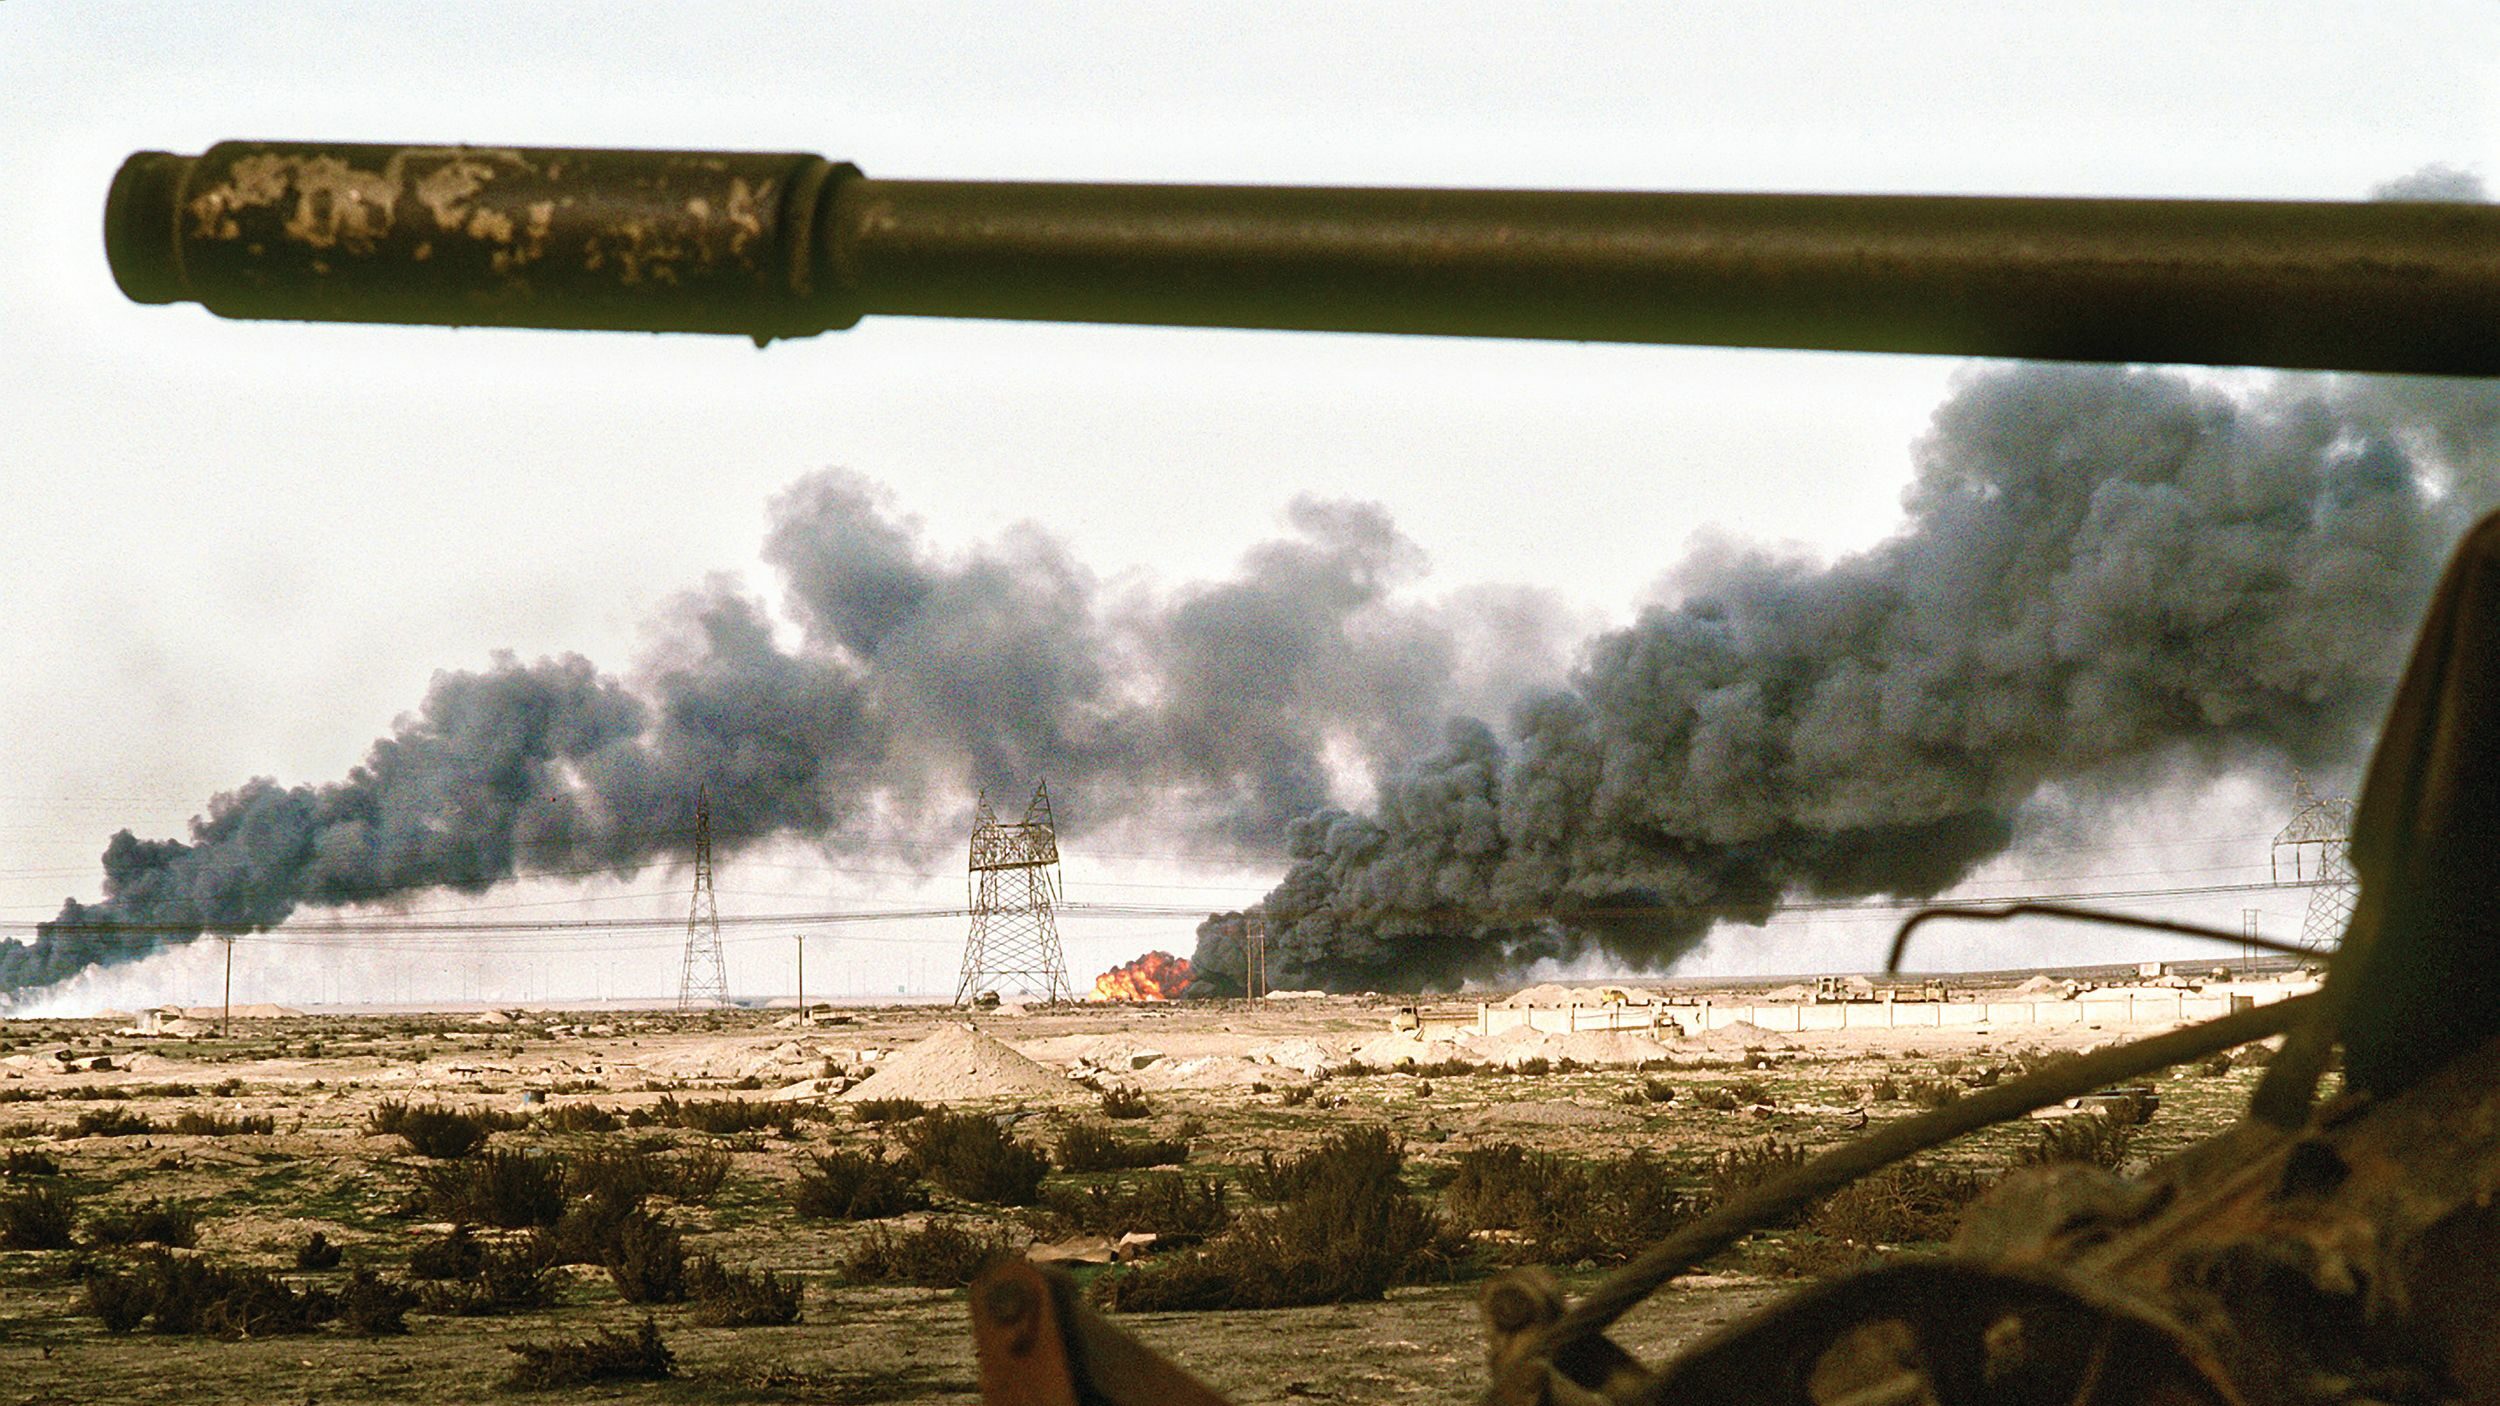 Thick black smoke seen in the distance beyond a burned-out Iraqi tank streams skyward after Iraqi forces withdrawing from Kuwait set fire to the Arab emirate’s oil fields.